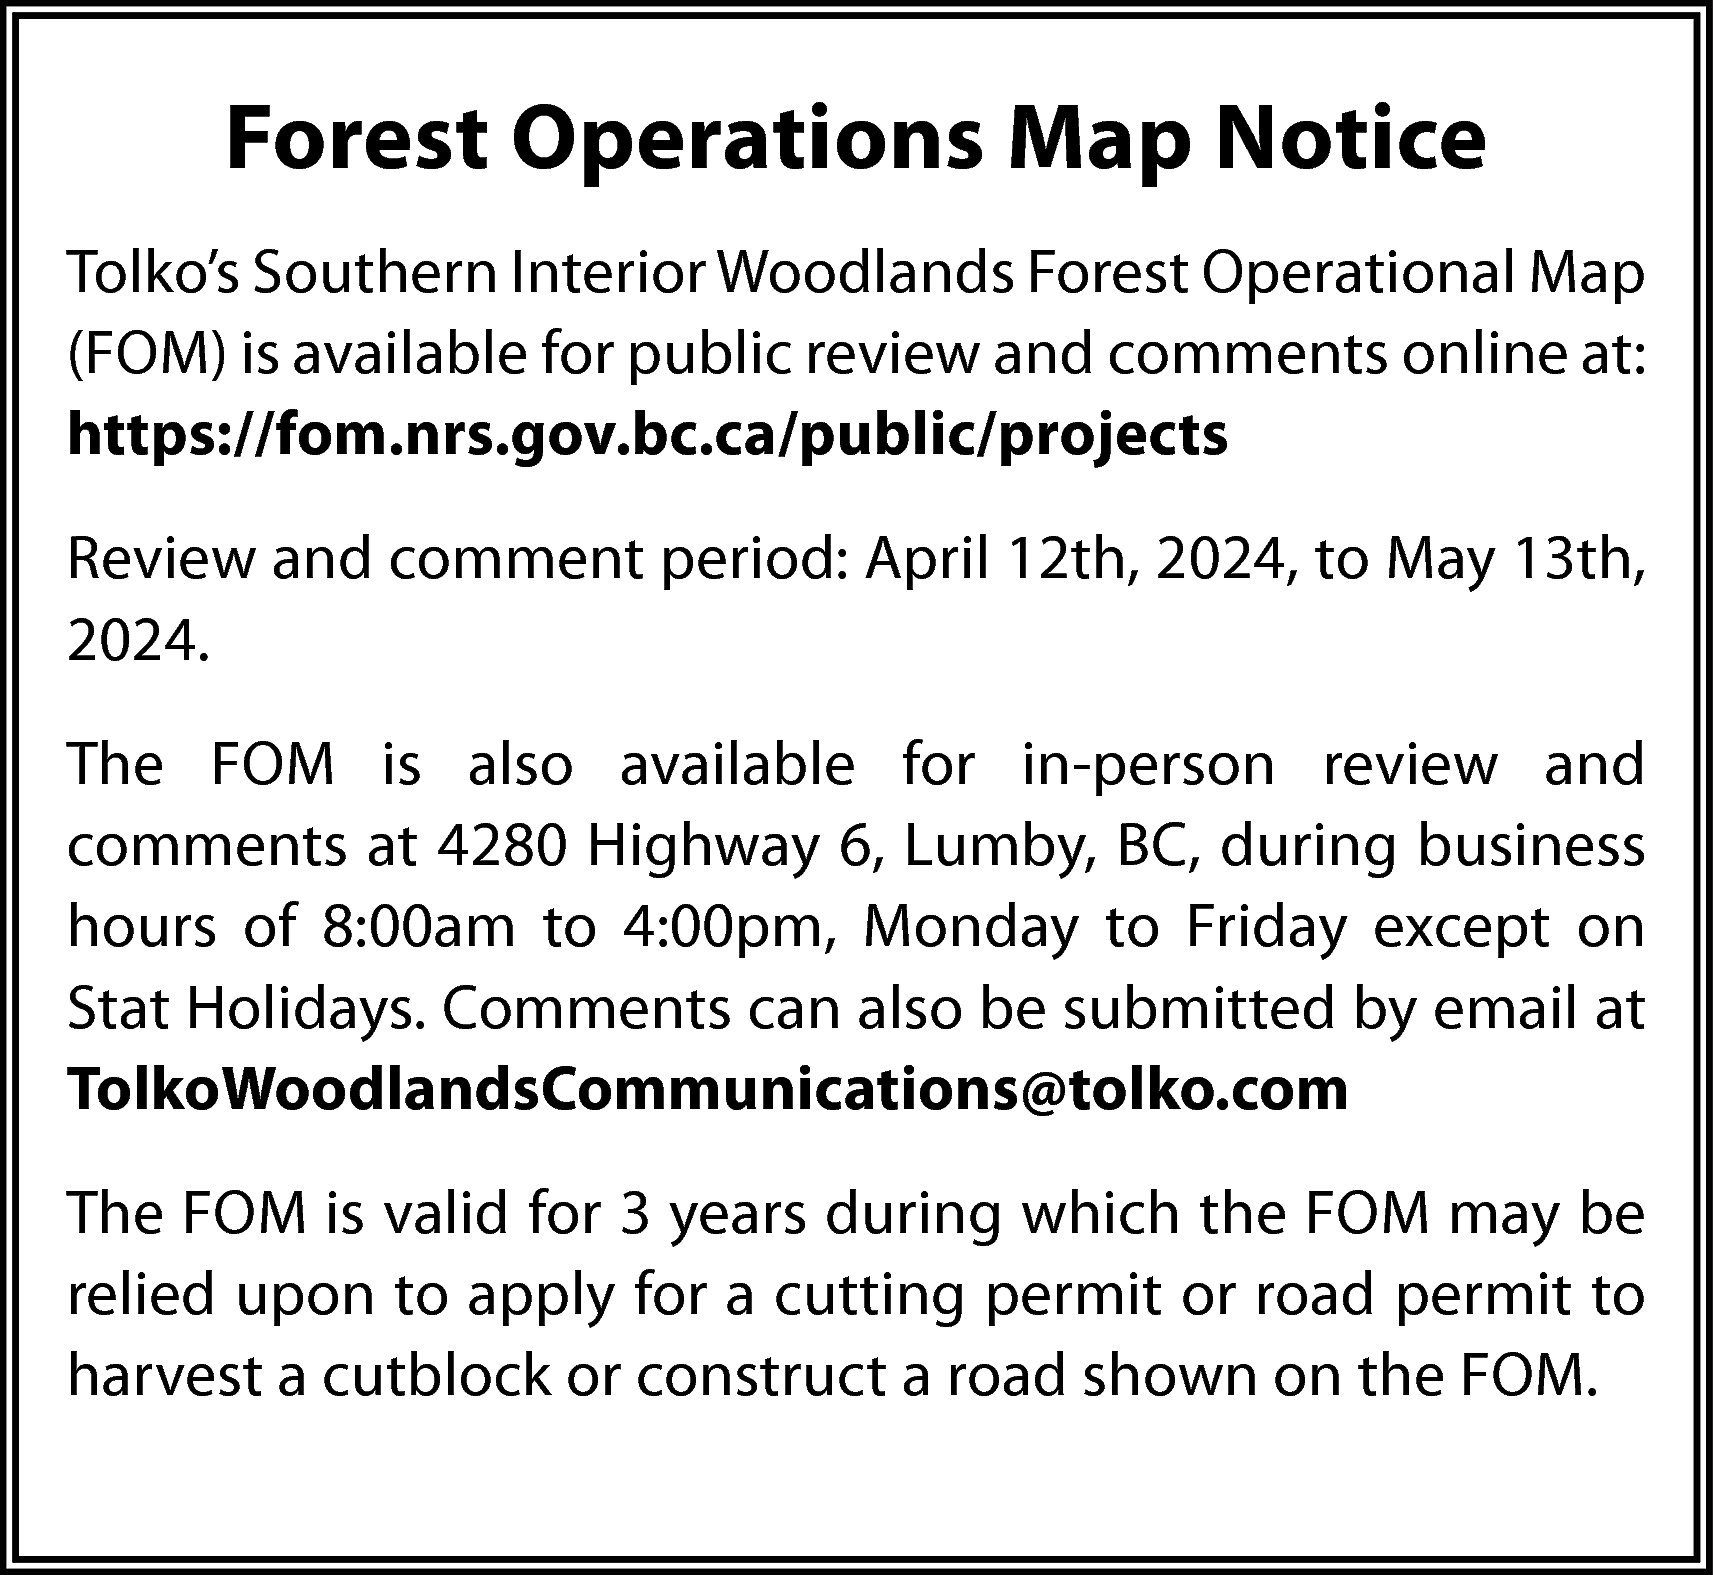 Forest Operations Map Notice <br>Tolko’s  Forest Operations Map Notice  Tolko’s Southern Interior Woodlands Forest Operational Map  (FOM) is available for public review and comments online at:  https://fom.nrs.gov.bc.ca/public/projects  Review and comment period: April 12th, 2024, to May 13th,  2024.  The FOM is also available for in-person review and  comments at 4280 Highway 6, Lumby, BC, during business  hours of 8:00am to 4:00pm, Monday to Friday except on  Stat Holidays. Comments can also be submitted by email at  TolkoWoodlandsCommunications@tolko.com  The FOM is valid for 3 years during which the FOM may be  relied upon to apply for a cutting permit or road permit to  harvest a cutblock or construct a road shown on the FOM.    